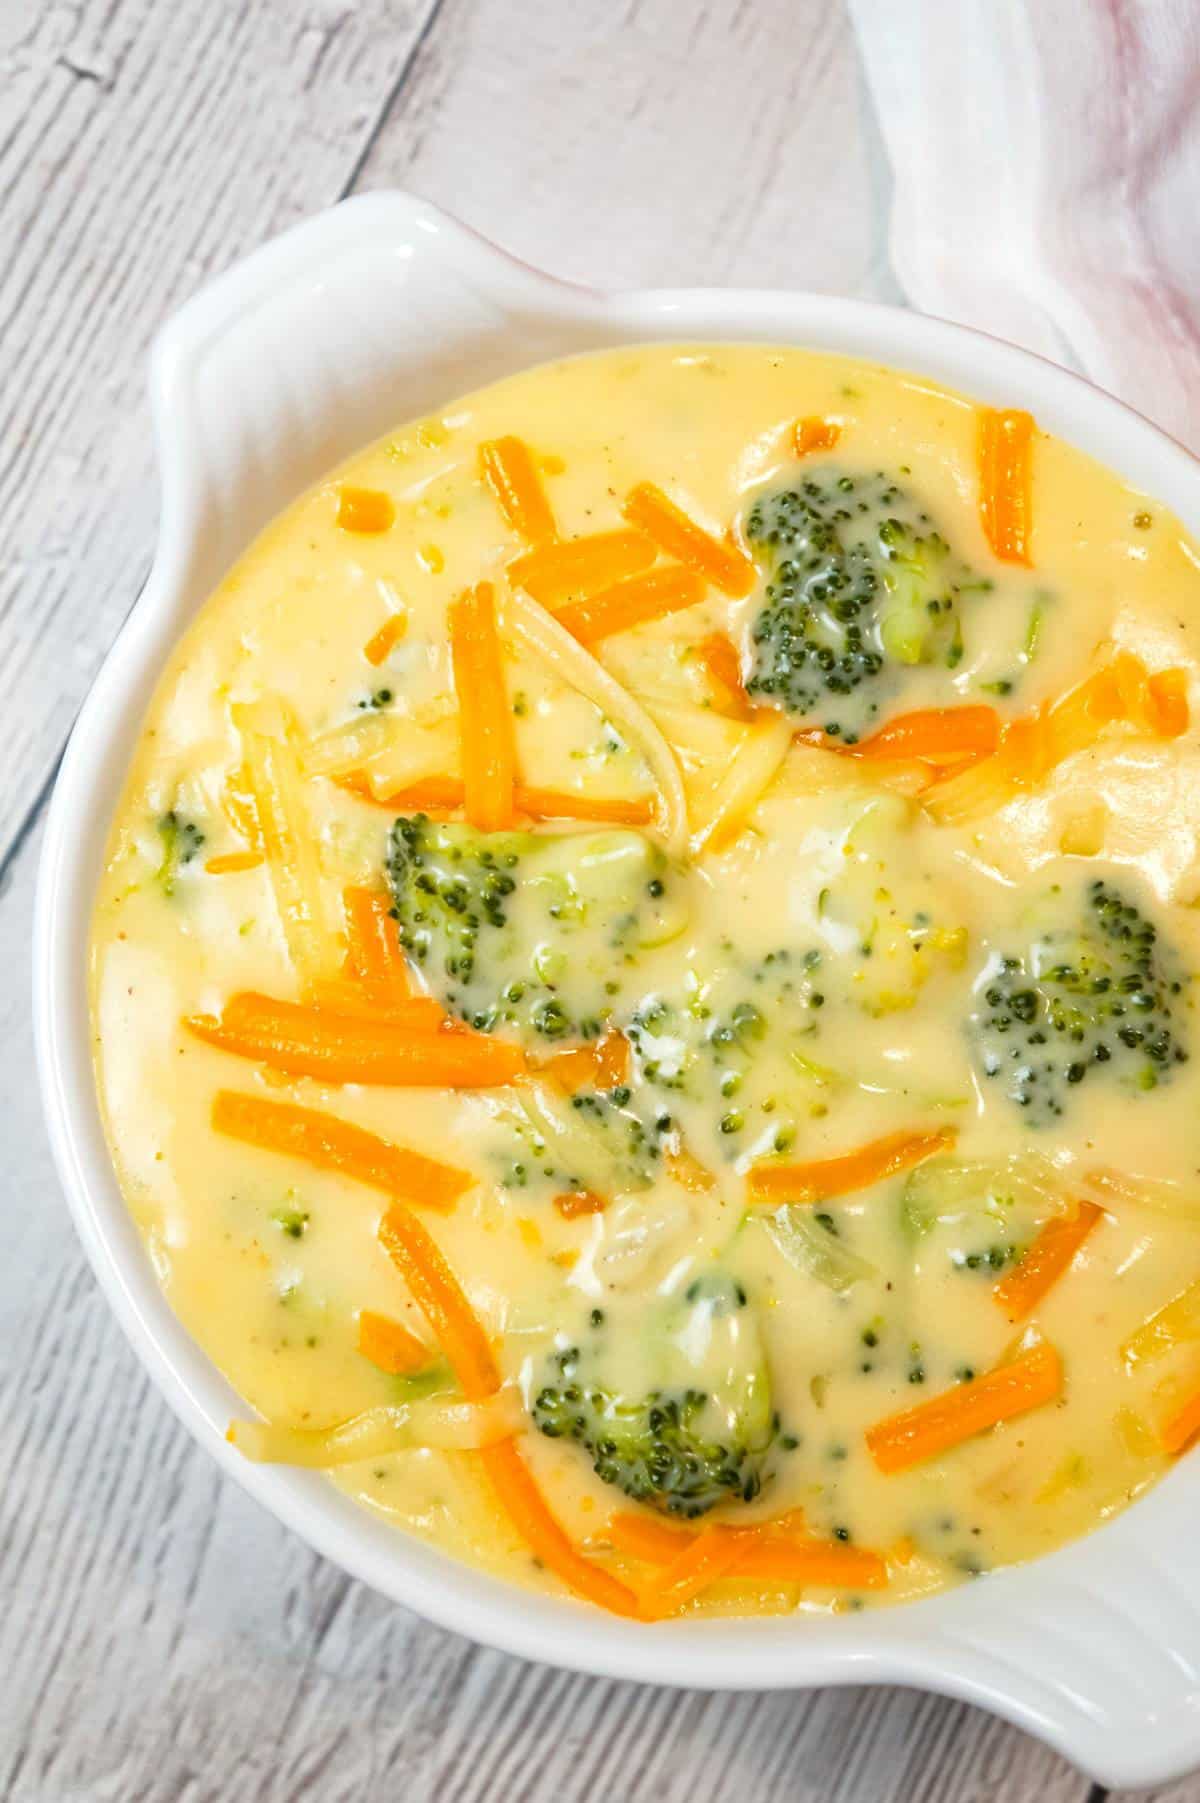 Broccoli Cheddar Soup is a thick and creamy soup recipe loaded with broccoli florets and cheddar cheese.